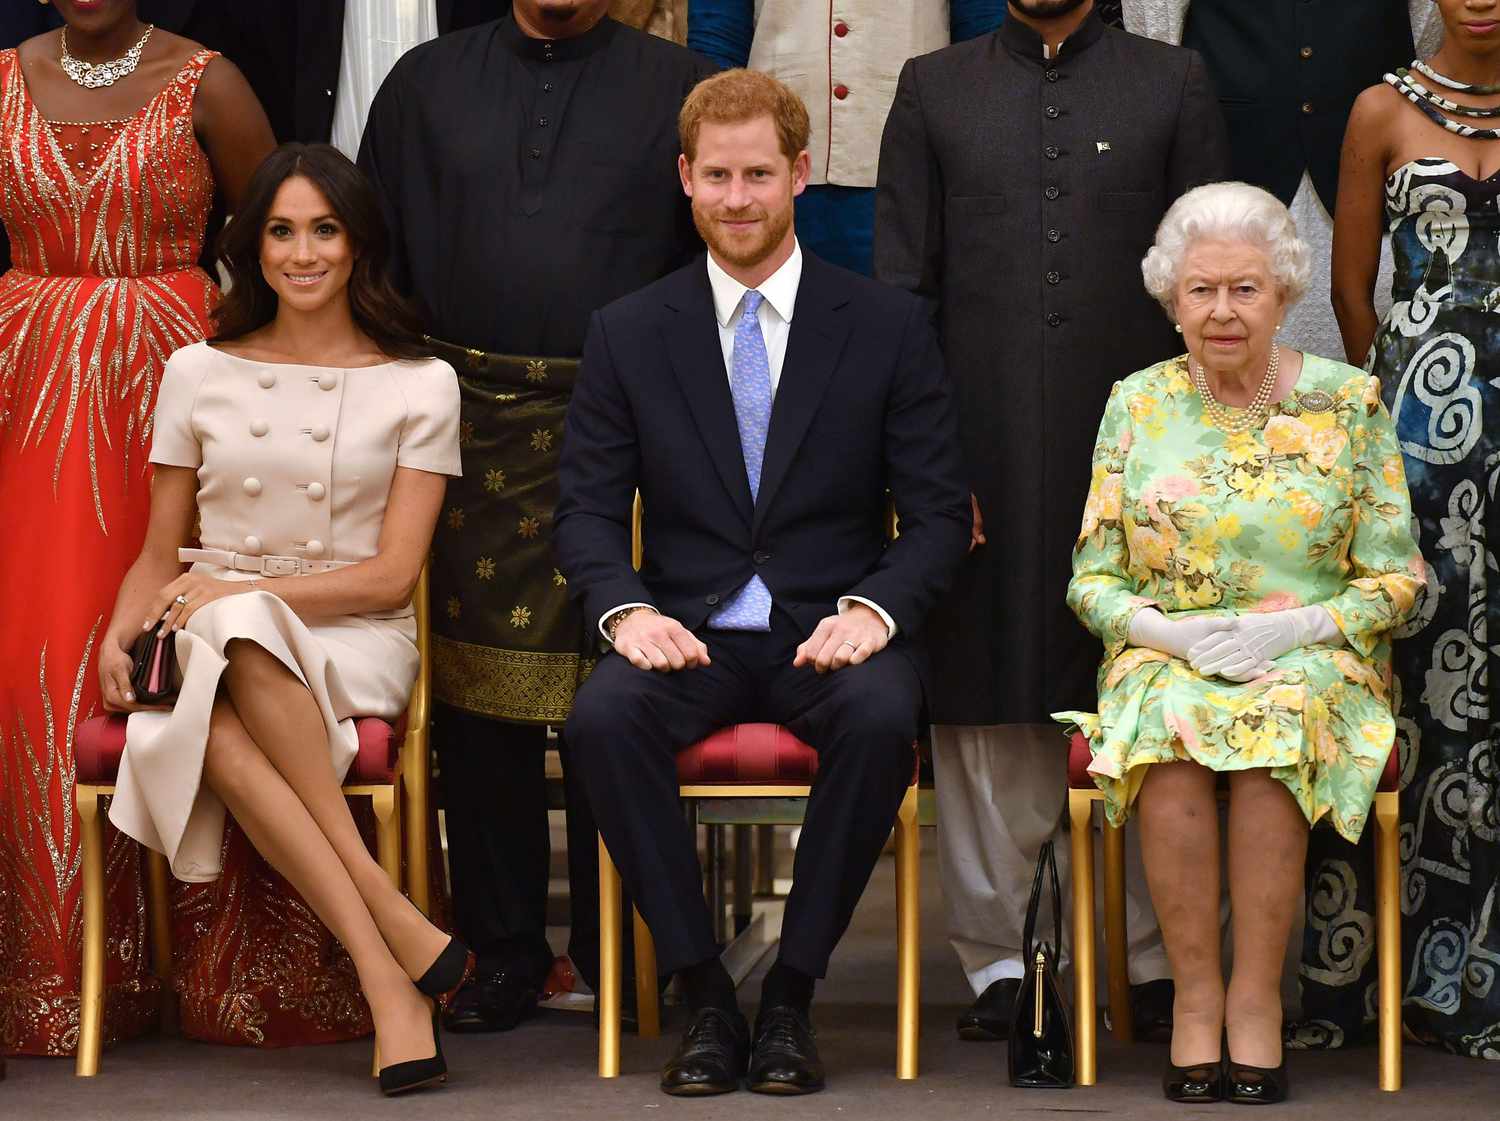 An image of a Meghan Markle, Prince Harry, and Queen Elizabeth II.